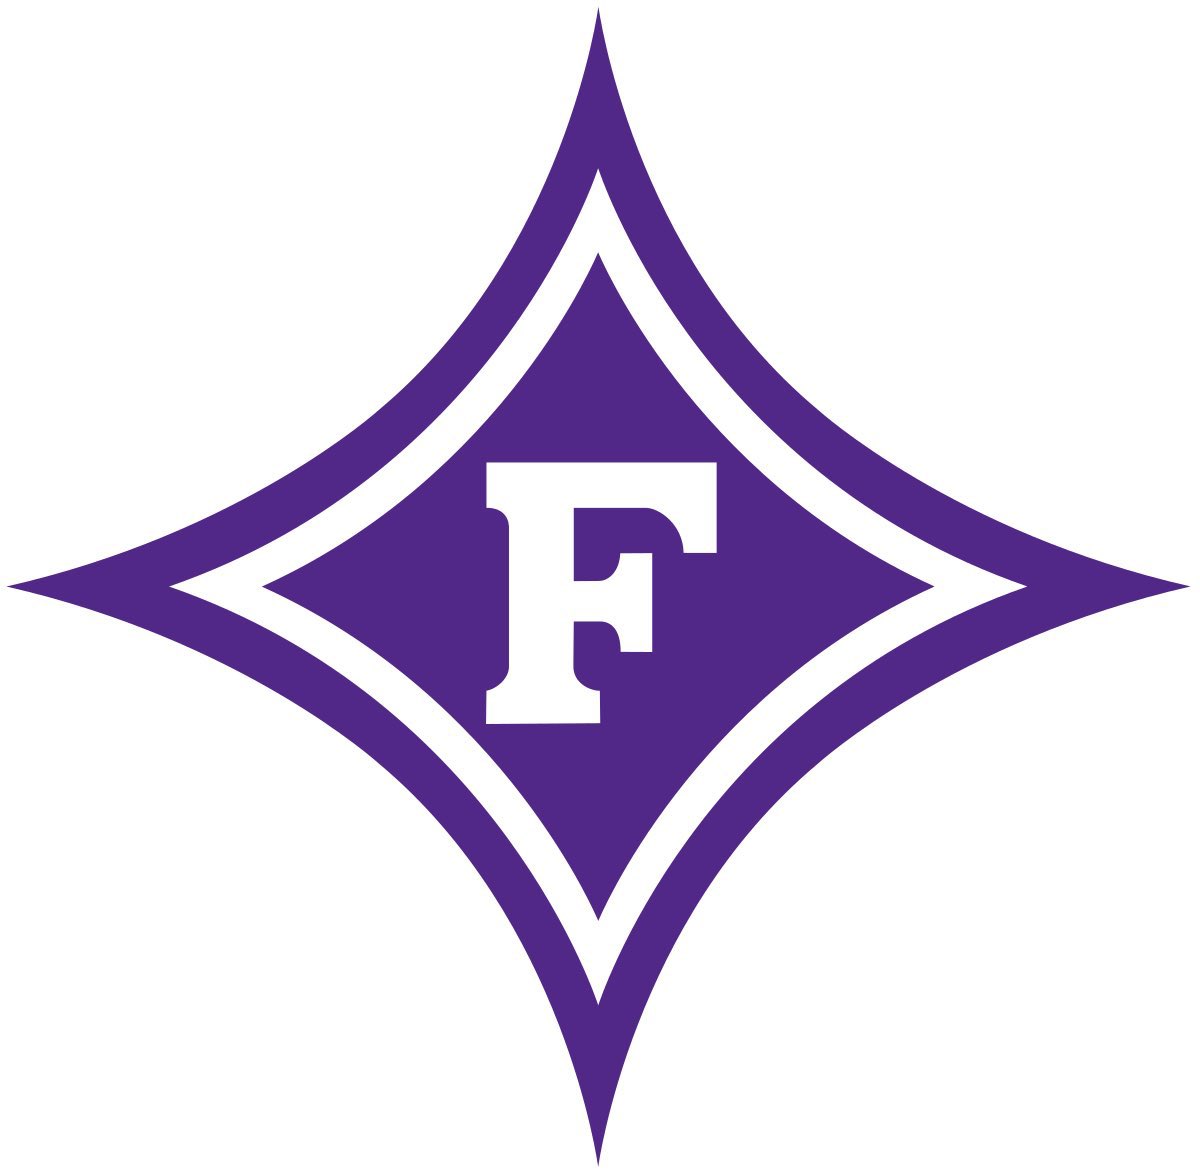 After a great conversation with @CoachKLewDL I’m blessed to receive an offer from Furman University! @PaladinFootball @ToCreek @CoachKTinsley @HOLD2017